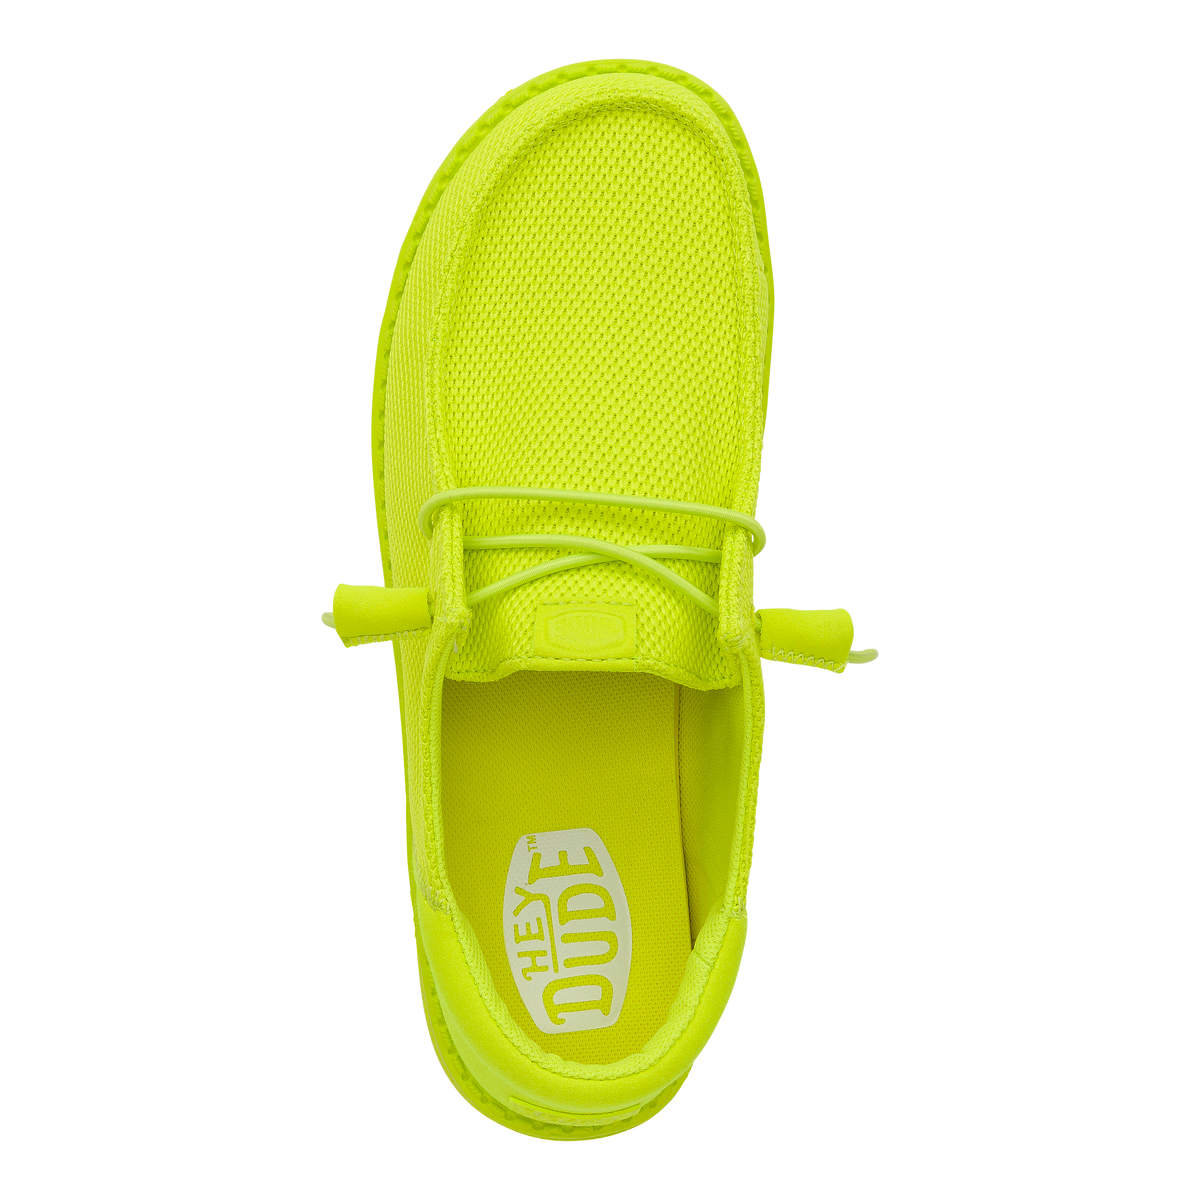 Wally Funk Mono Punch/Lime - Men's Shoes | HEYDUDE shoes